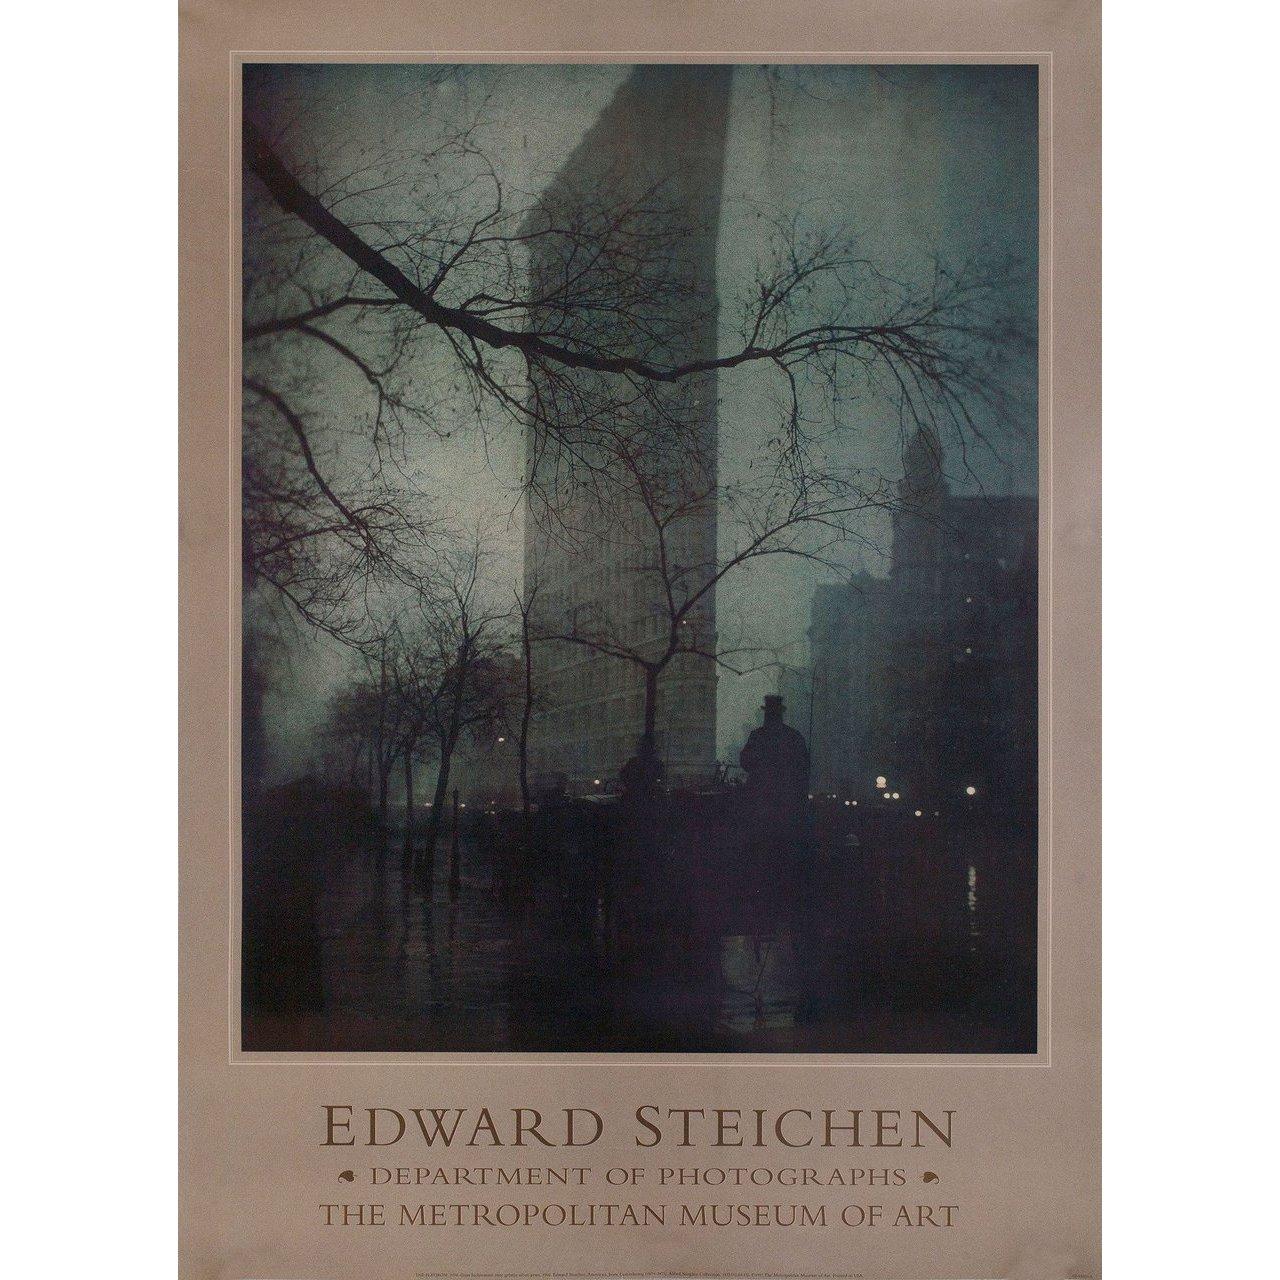 Original 1997 U.S. poster by Edward Steichen for the exhibition Edward Steichen. Fine condition, rolled. Please note: the size is stated in inches and the actual size can vary by an inch or more.
 